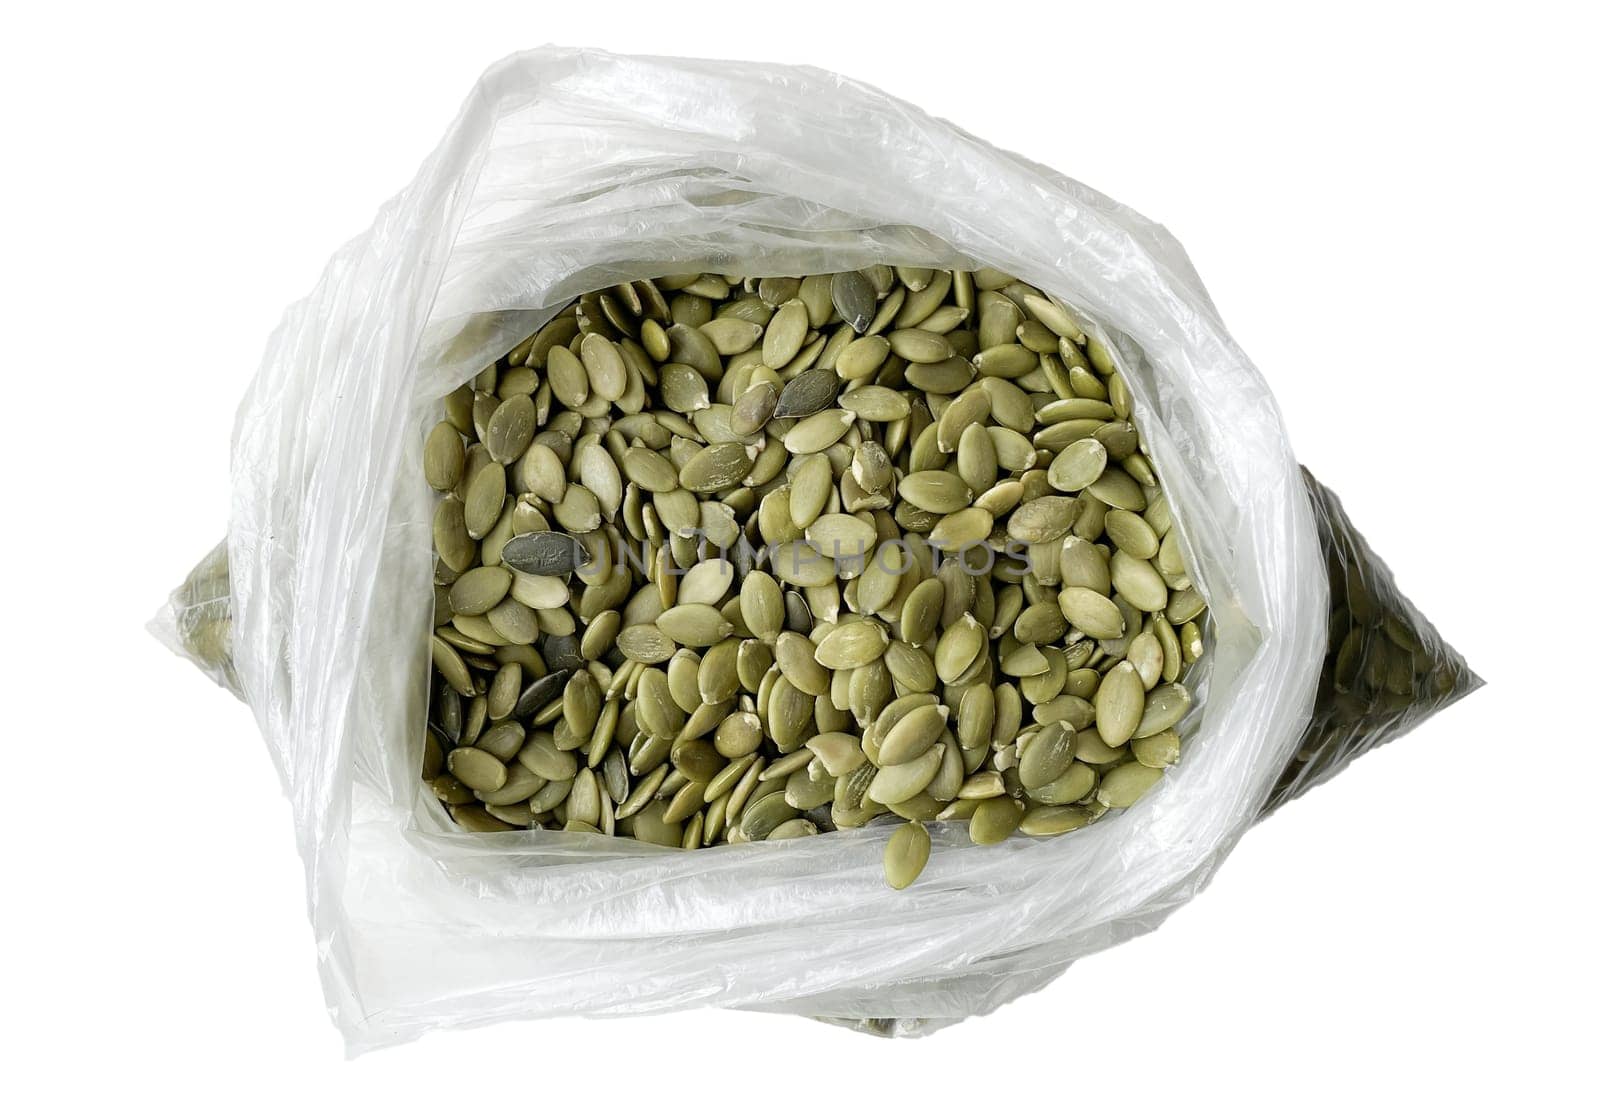 pumpkin seeds in a bag on a white background.